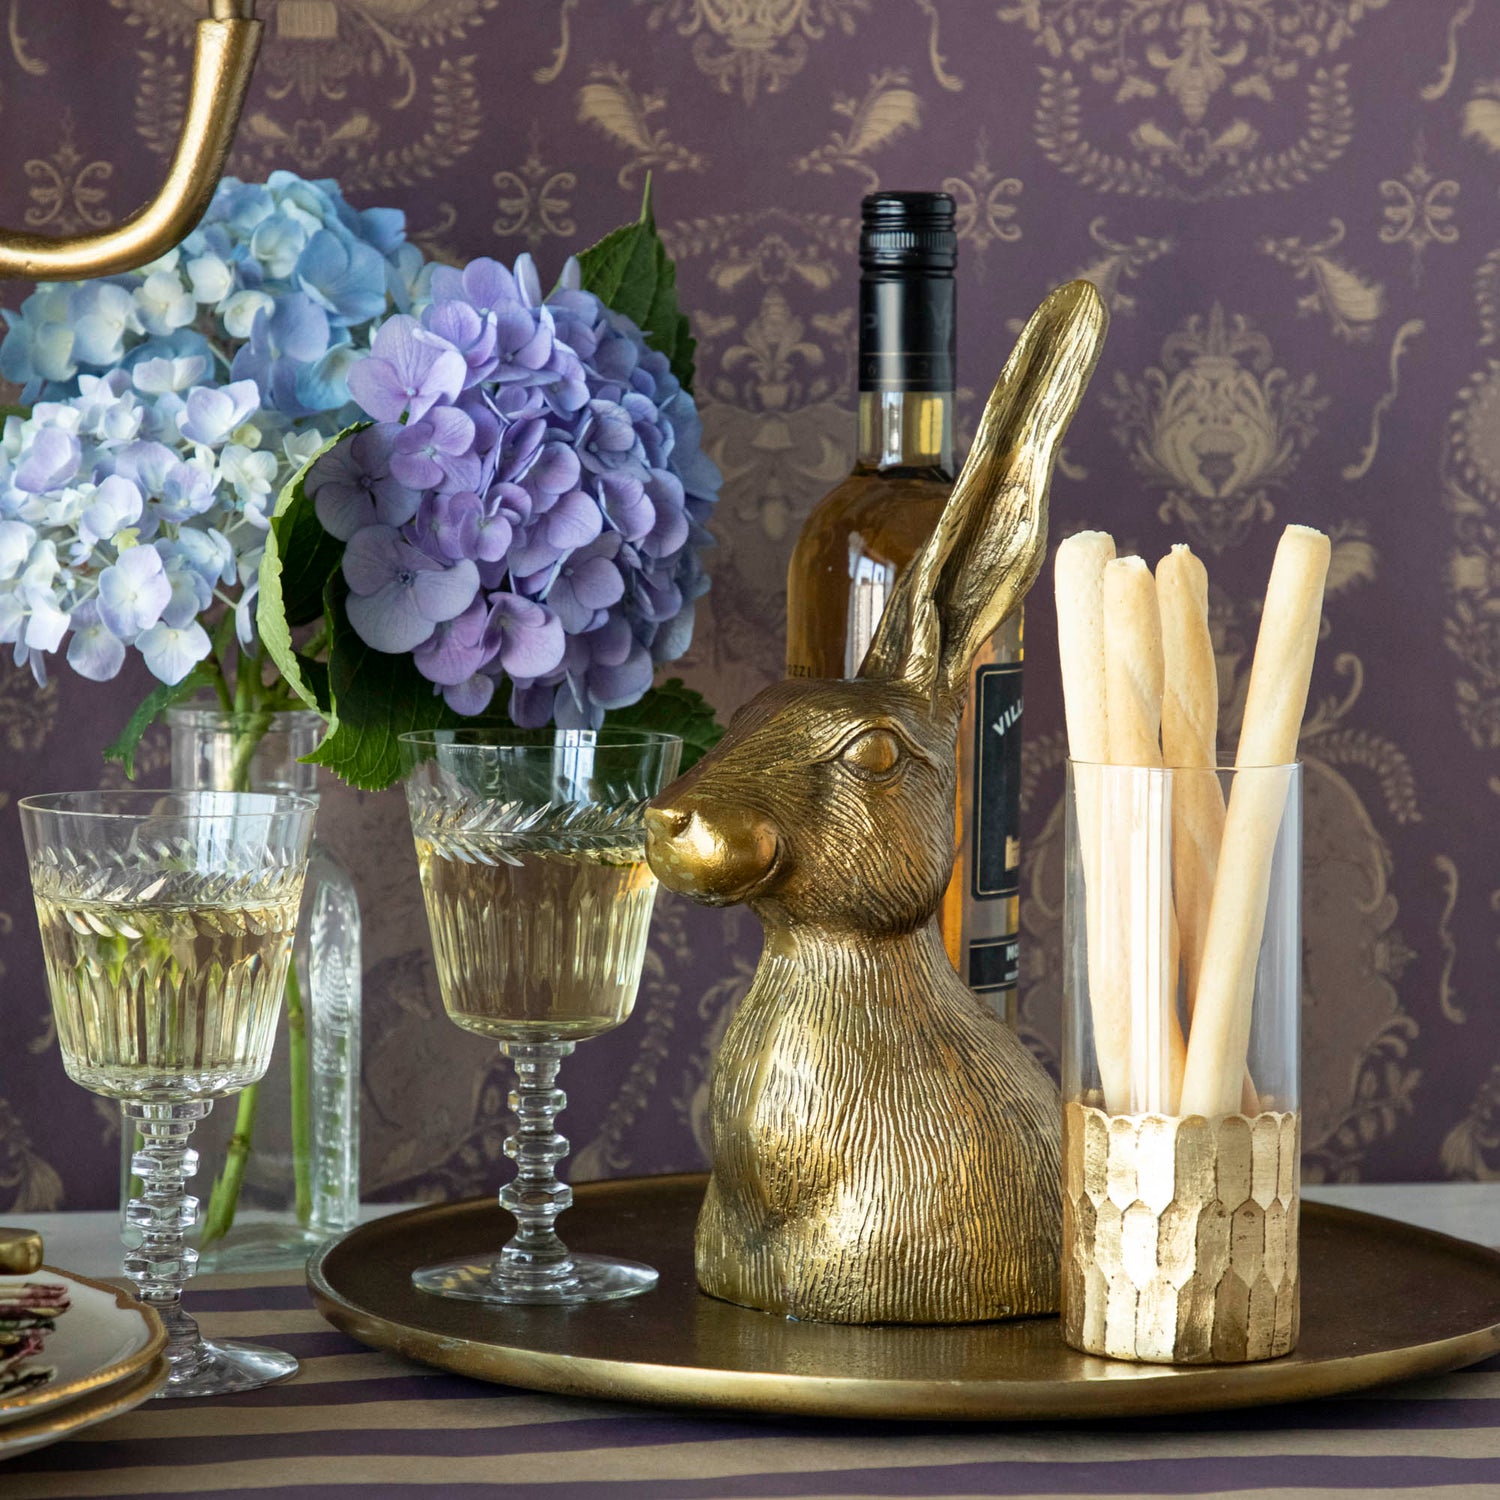 A whimsical gold Hare Platter perched on a bronze platter, elegantly displayed on a table alongside a glass of wine. (Brand: Accent Decor)